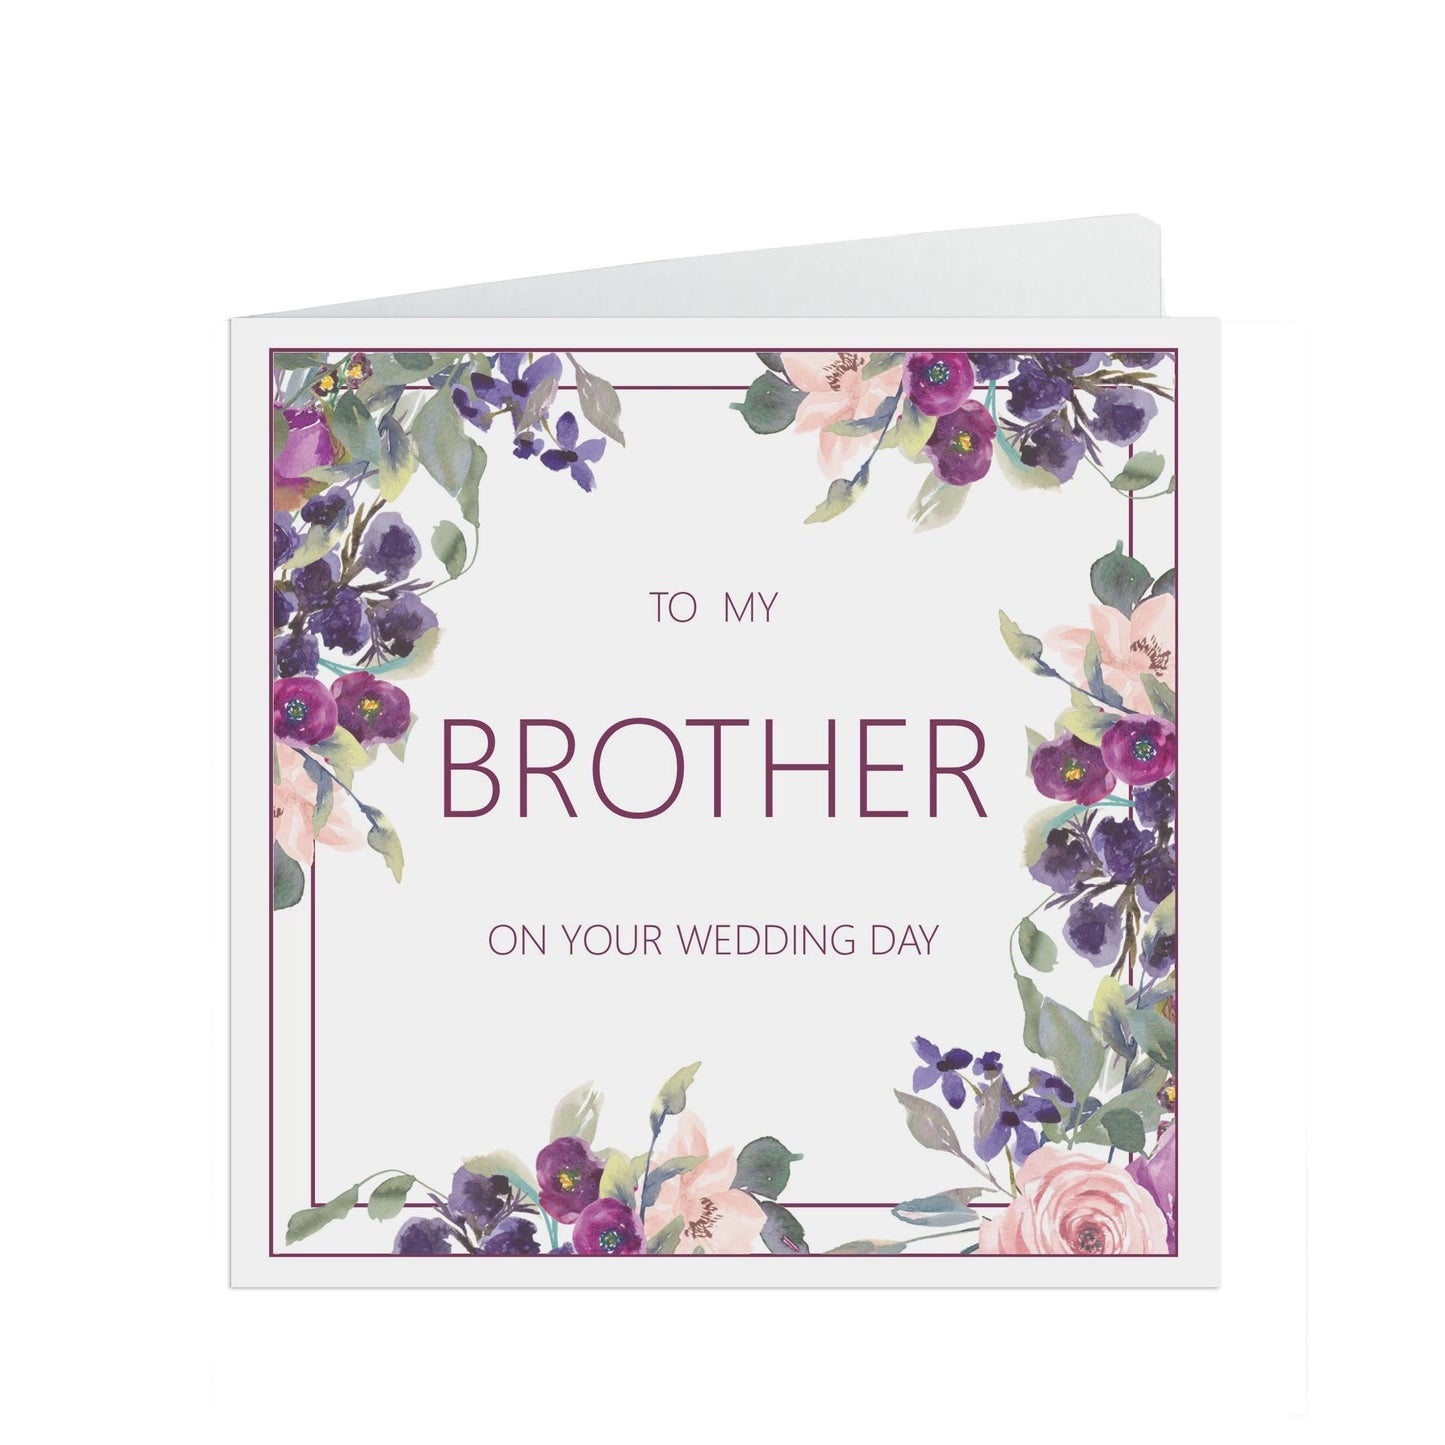  Brother Wedding Day Card, Purple Floral 6x6 Inches With A Kraft Envelope by PMPRINTED 